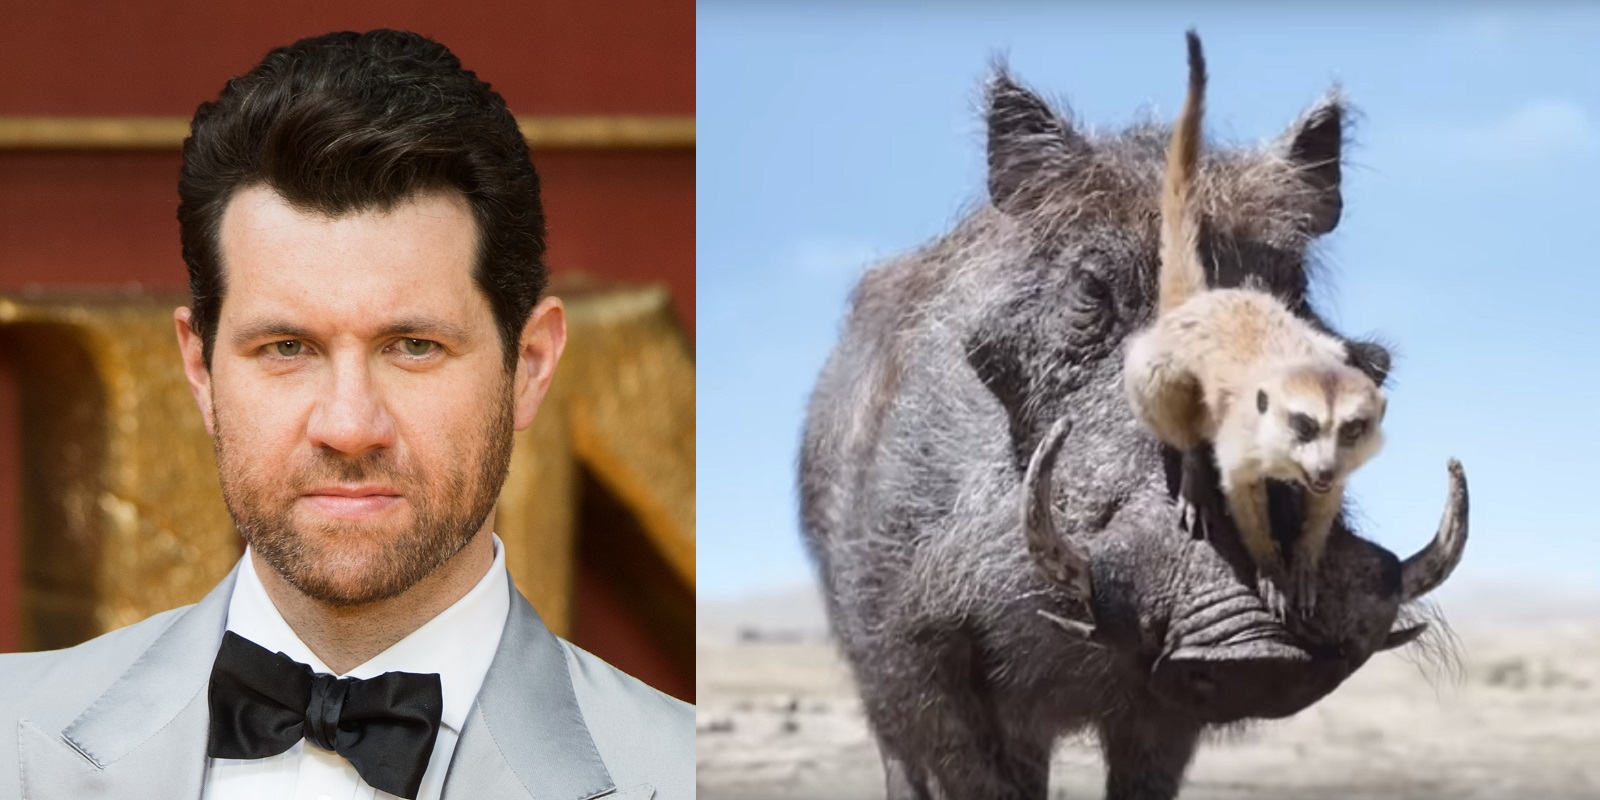 Timon Lion King Gay Porn - The Lion King star Billy Eichner says he played Timon with 'gay  sensibility' | PinkNews